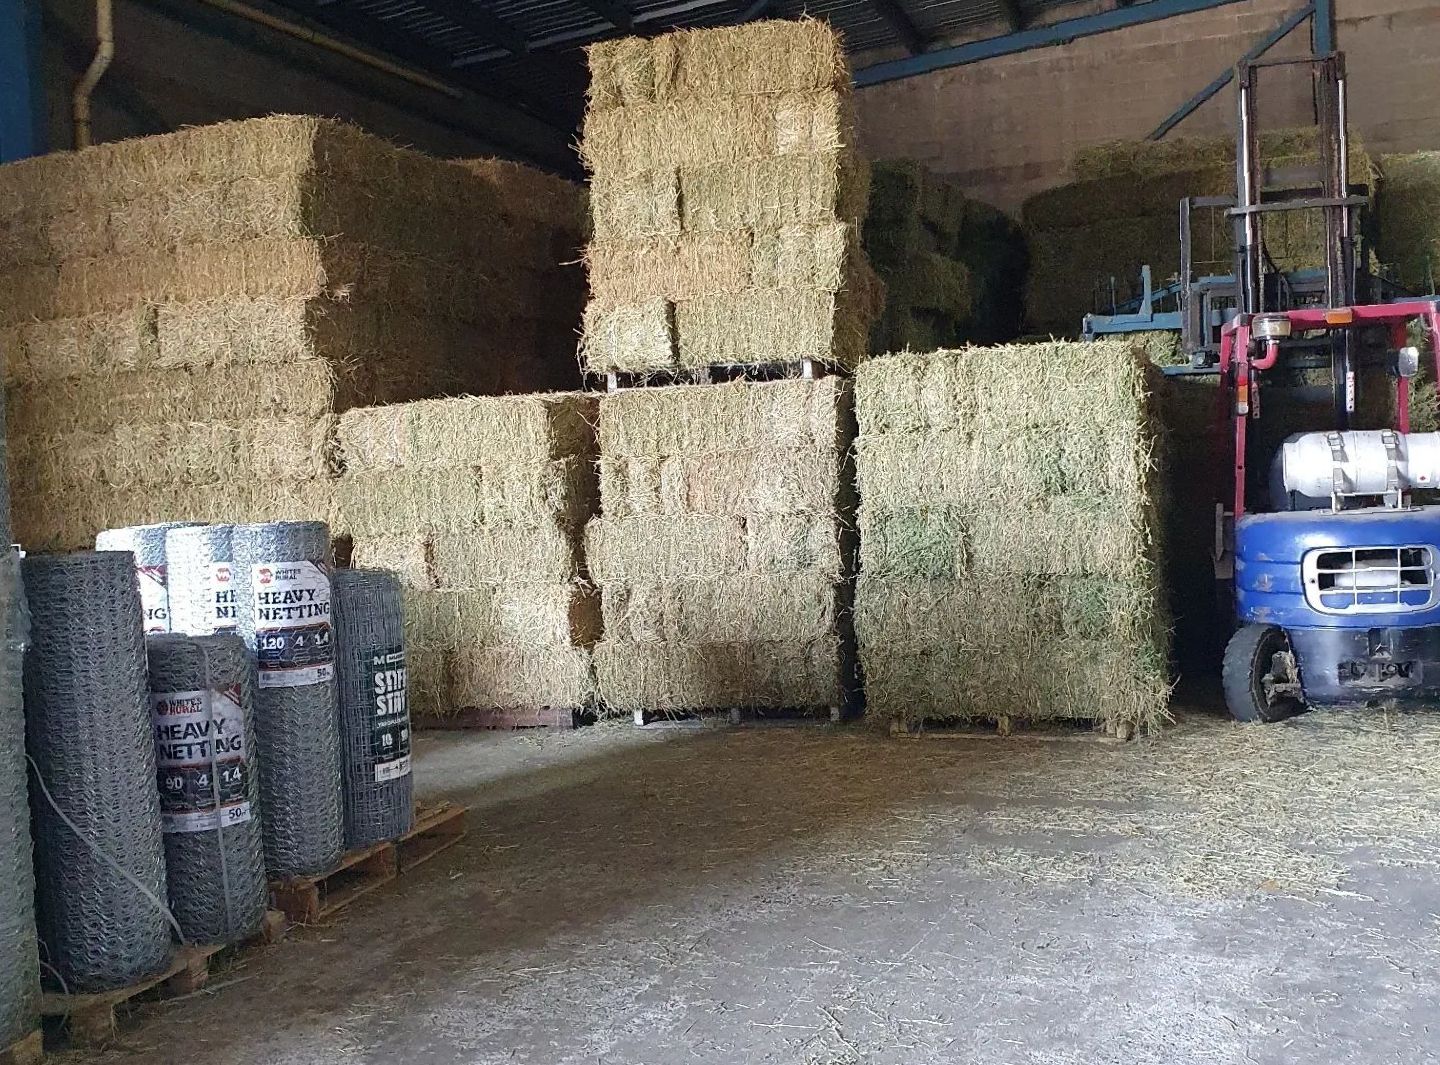 Hay Bales Stacked And Heavy Netting — Kempsey Produce & Saddlery in Kempsey, NSW